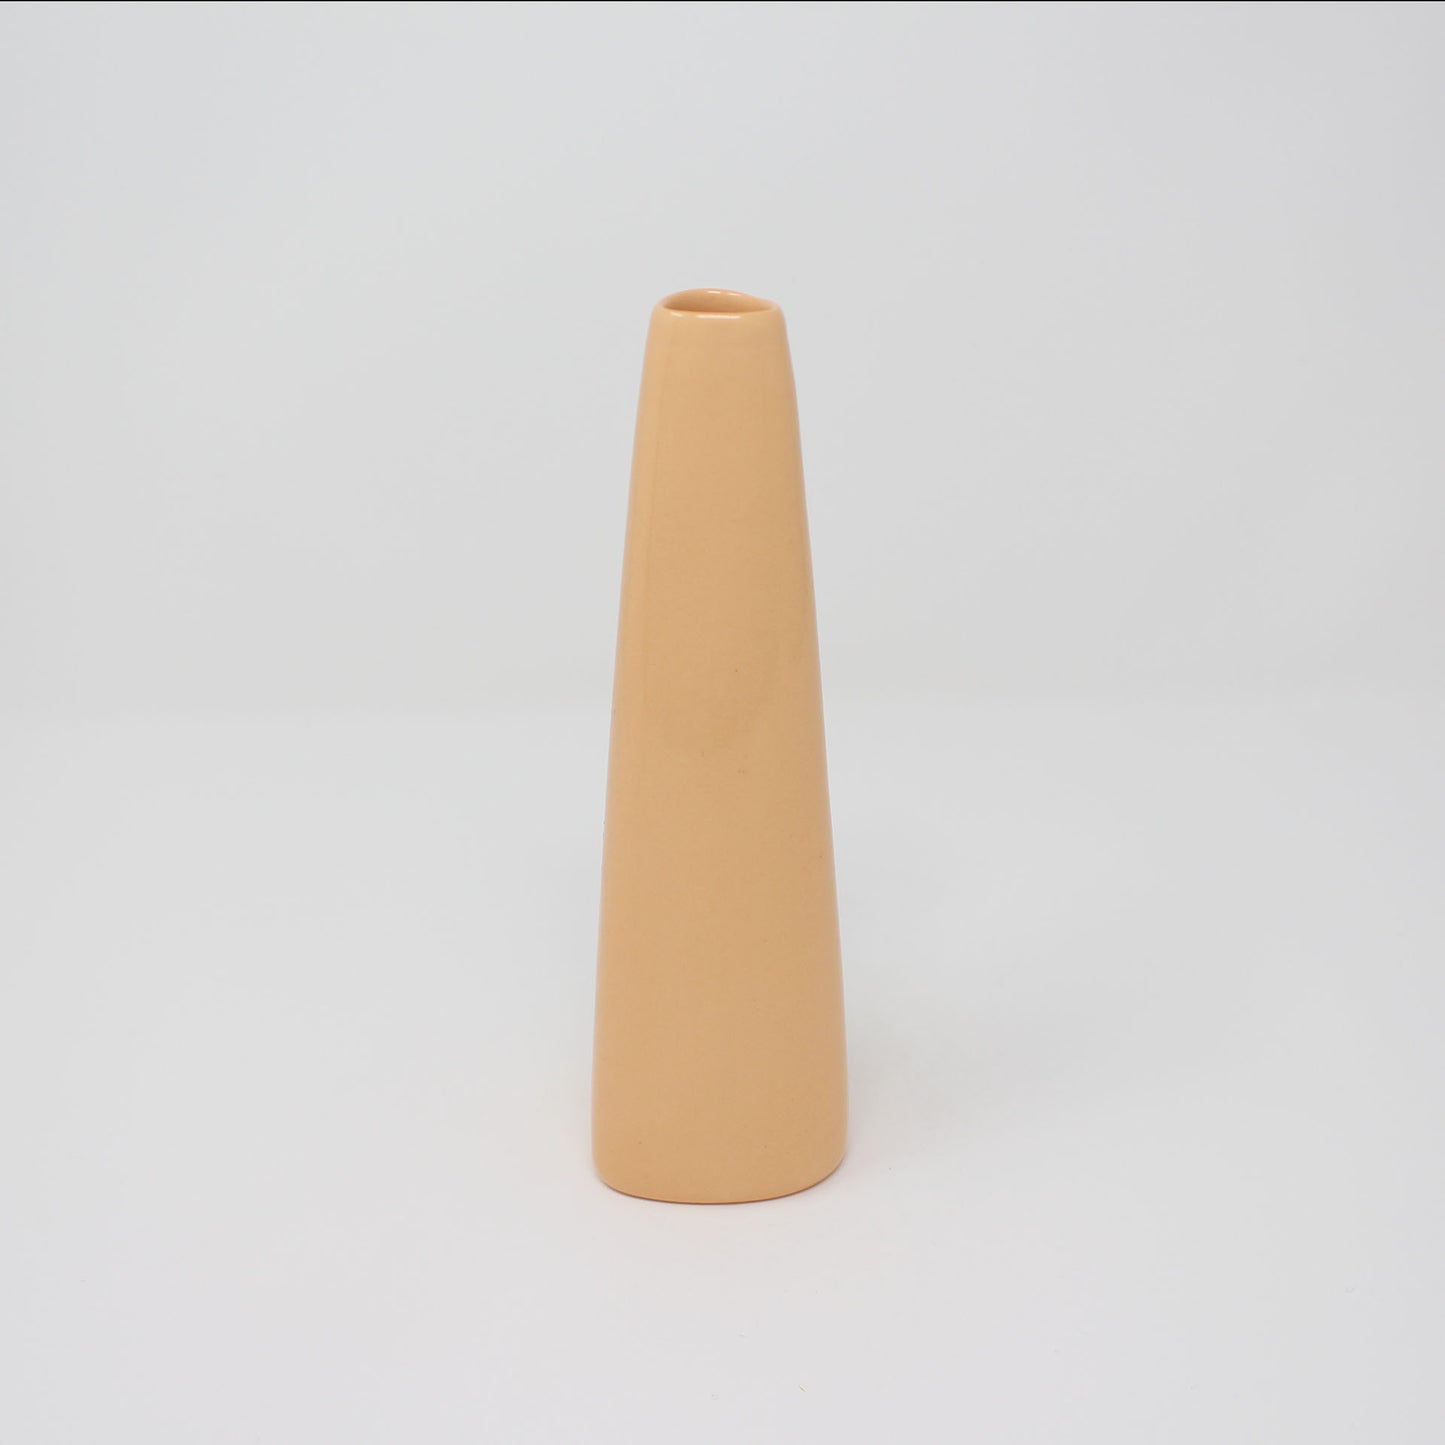 One Color : Vase No. 5 Extra Tall